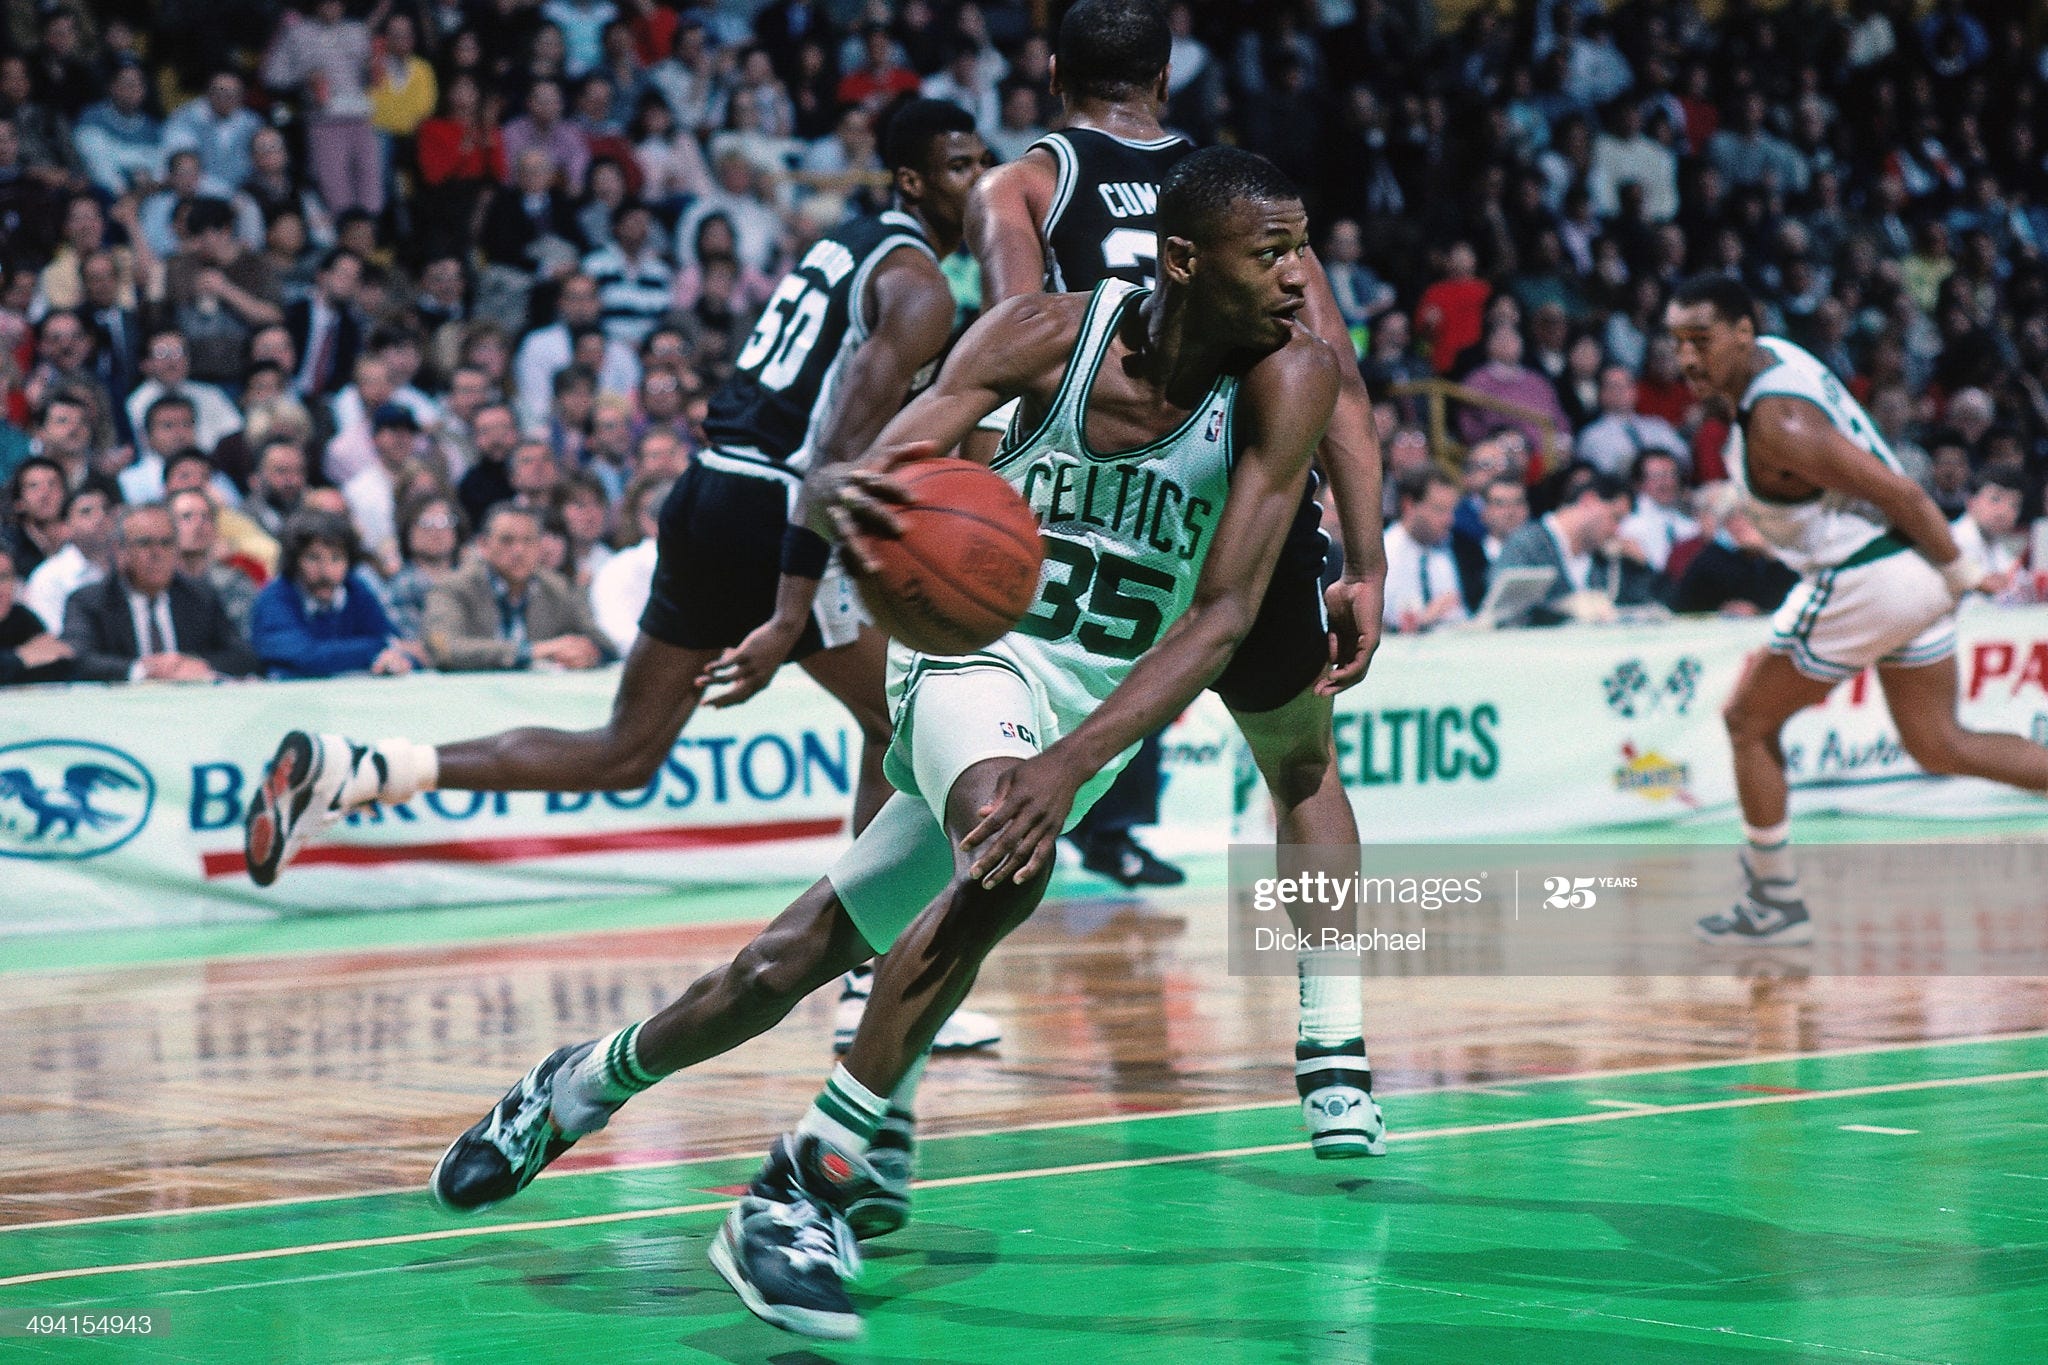 30 years since Reggie Lewis' passing, and still too many young